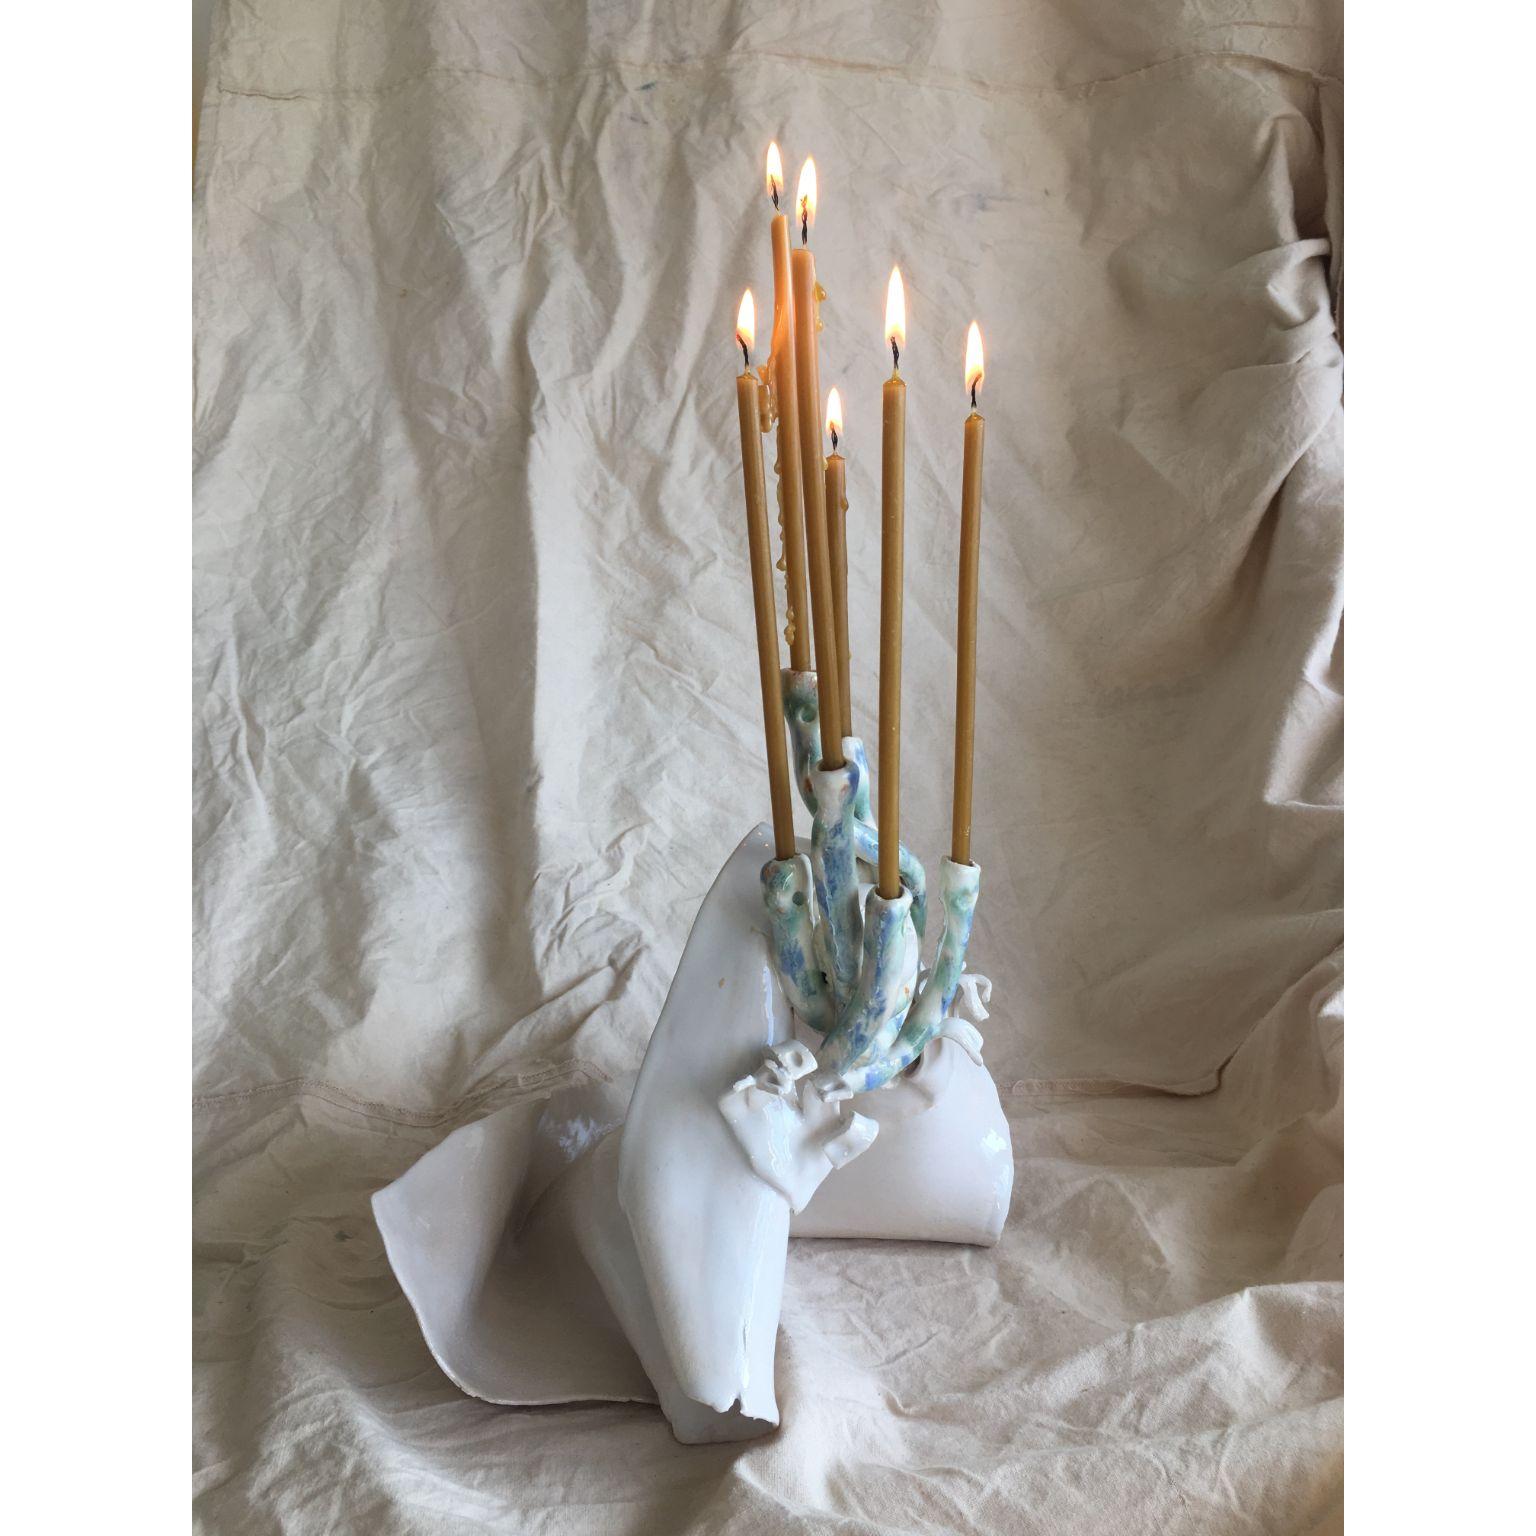 Medusa candle holder by Ana Botezatu.
Dimensions: D 25 x W 19 x H 23.5 cm.
Materials: tin glazed earthenware.

Ana Botezatu (b. 1982, Bra?ov (former Kronstadt), Romania) lives and works in Berlin. She works with ceramics, drawing, book